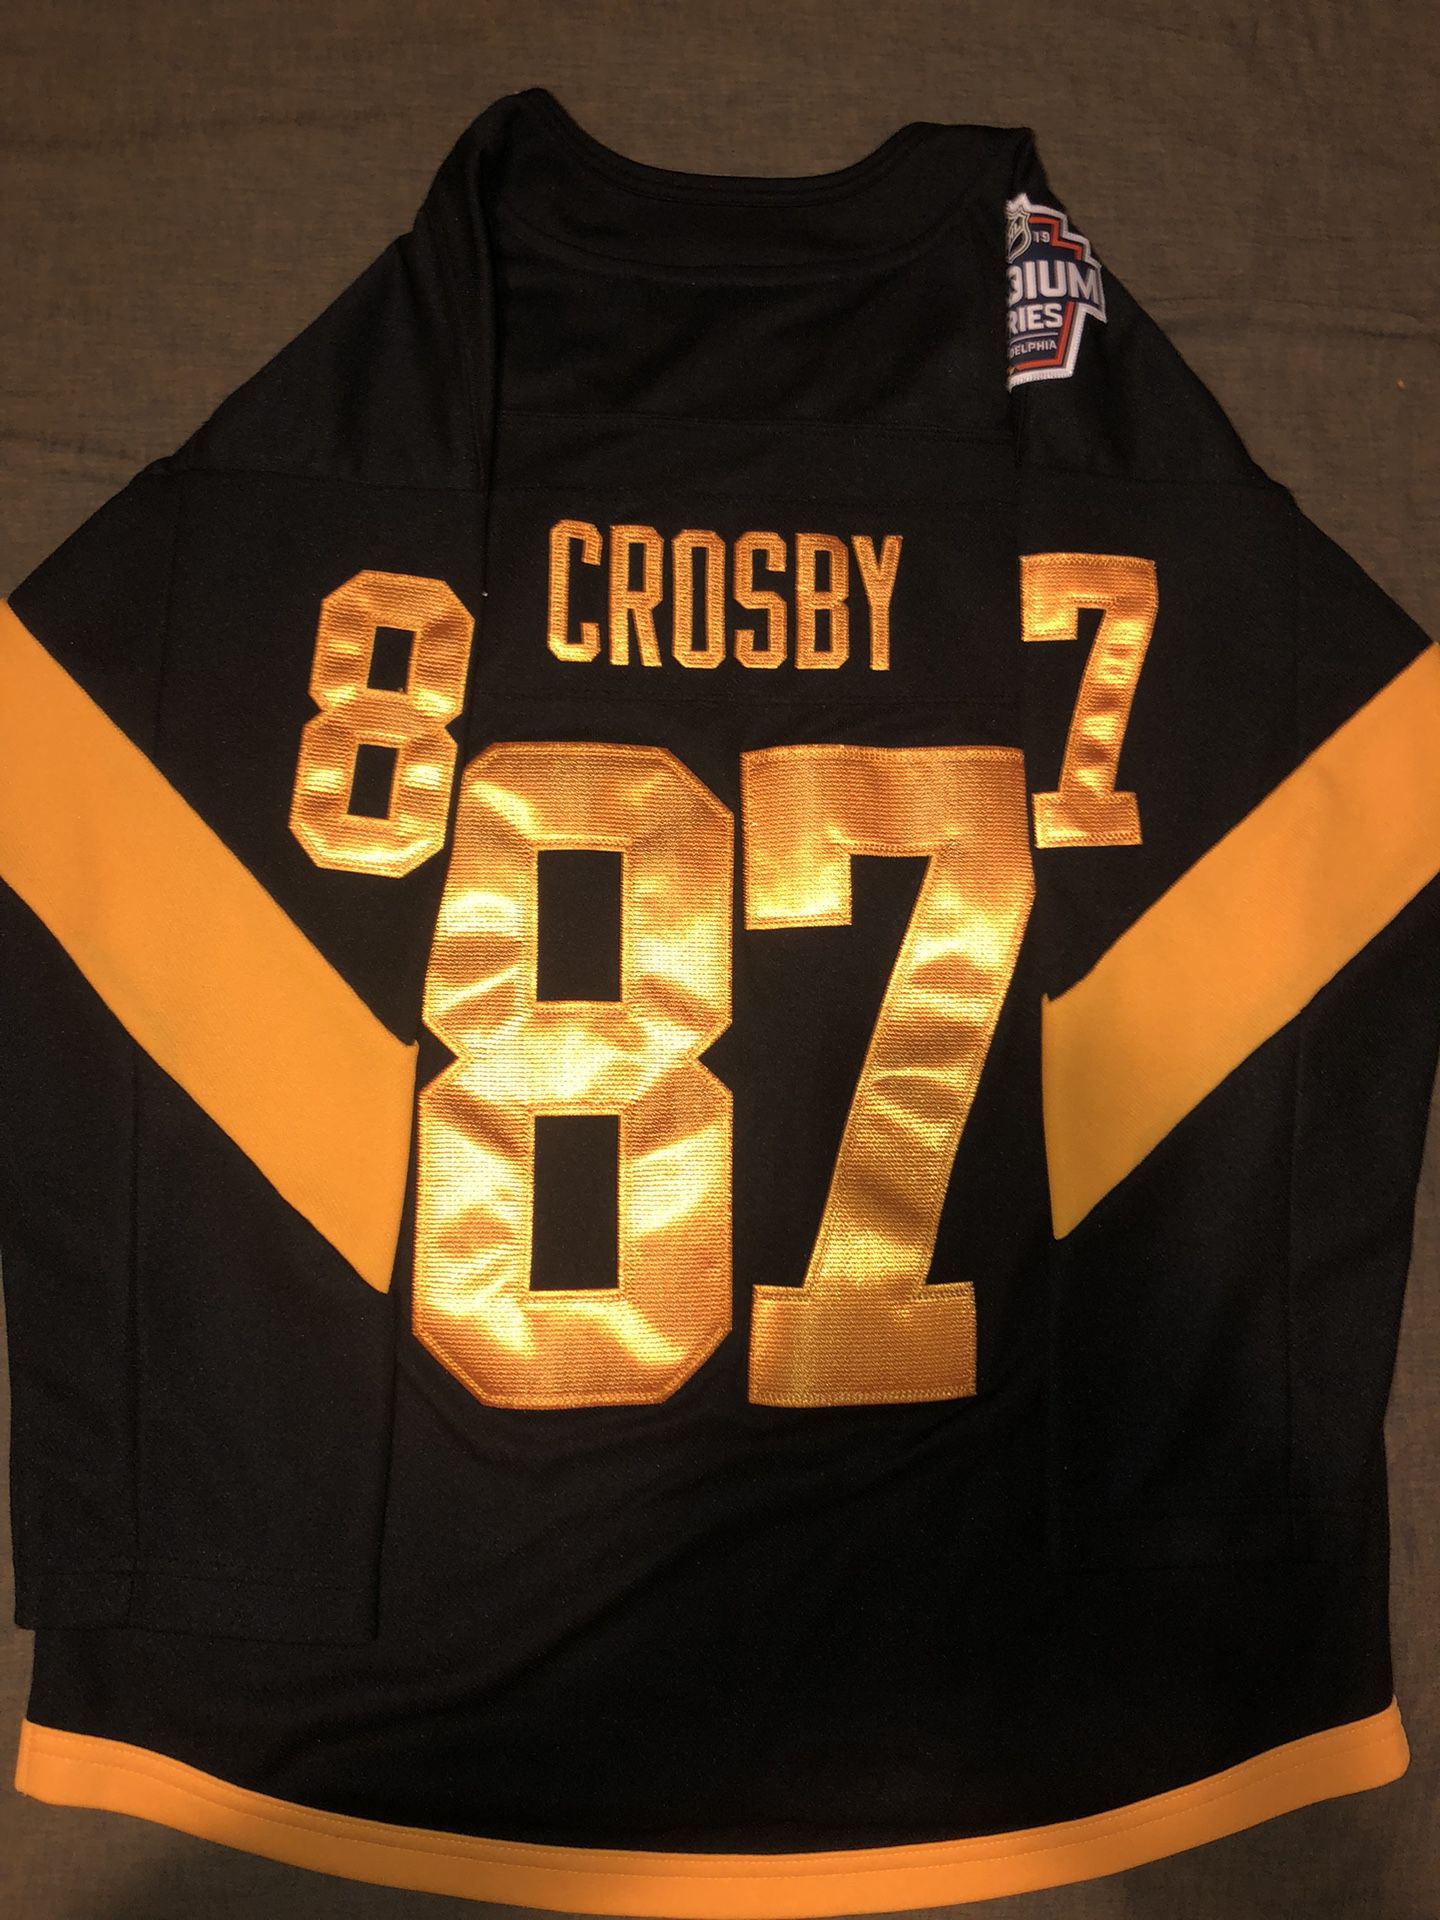 Sidney Crosby NHL jersey for Sale in Raleigh, NC - OfferUp